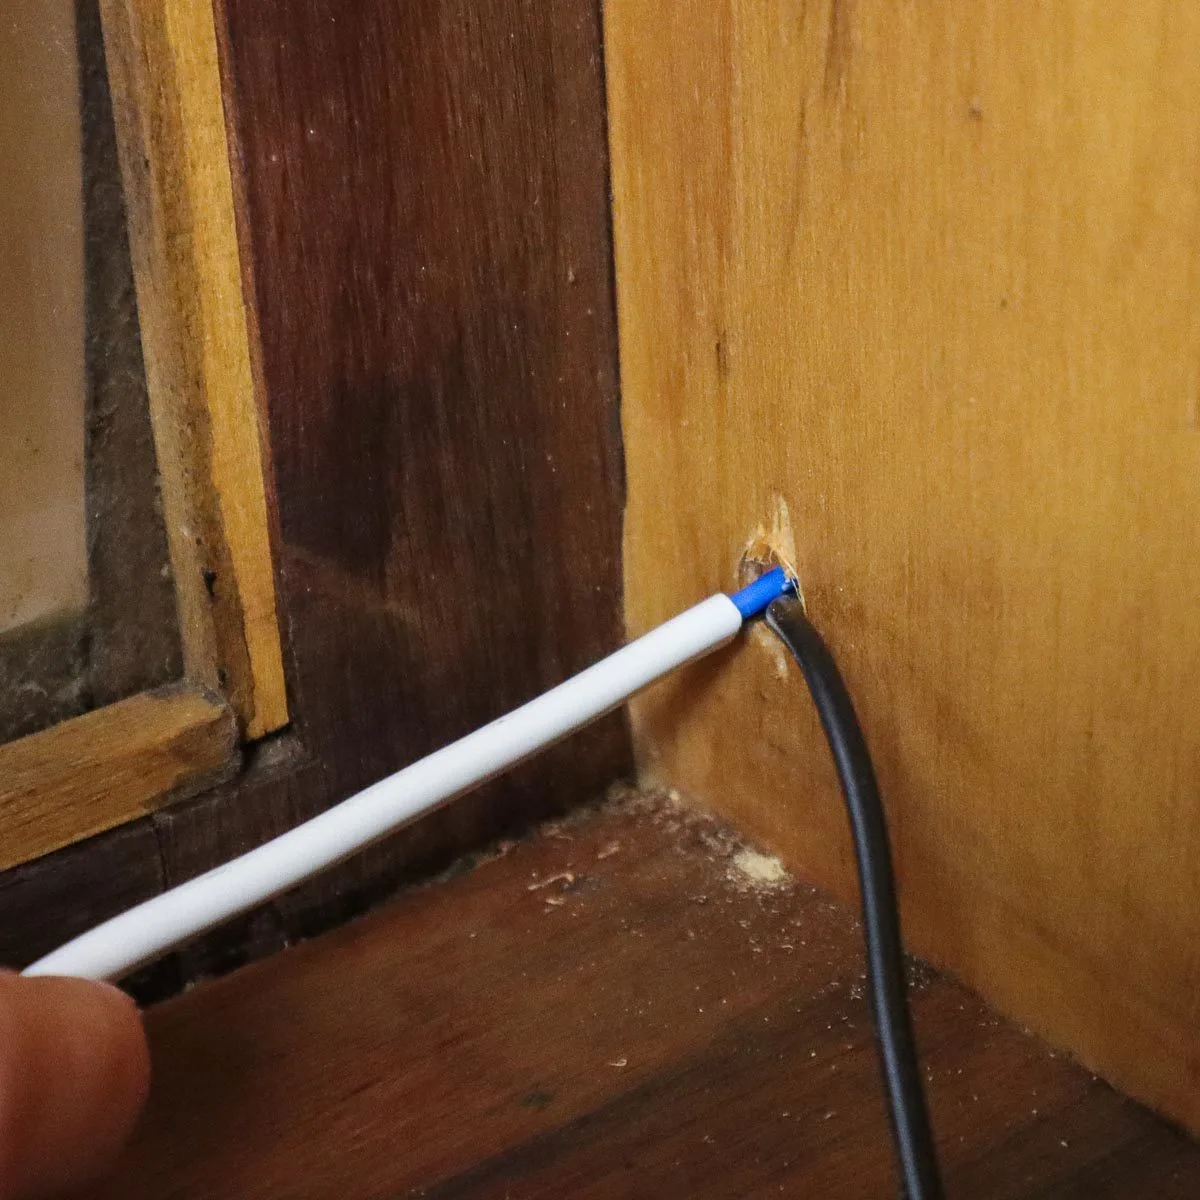 Plug being fed through hole in cabinet.